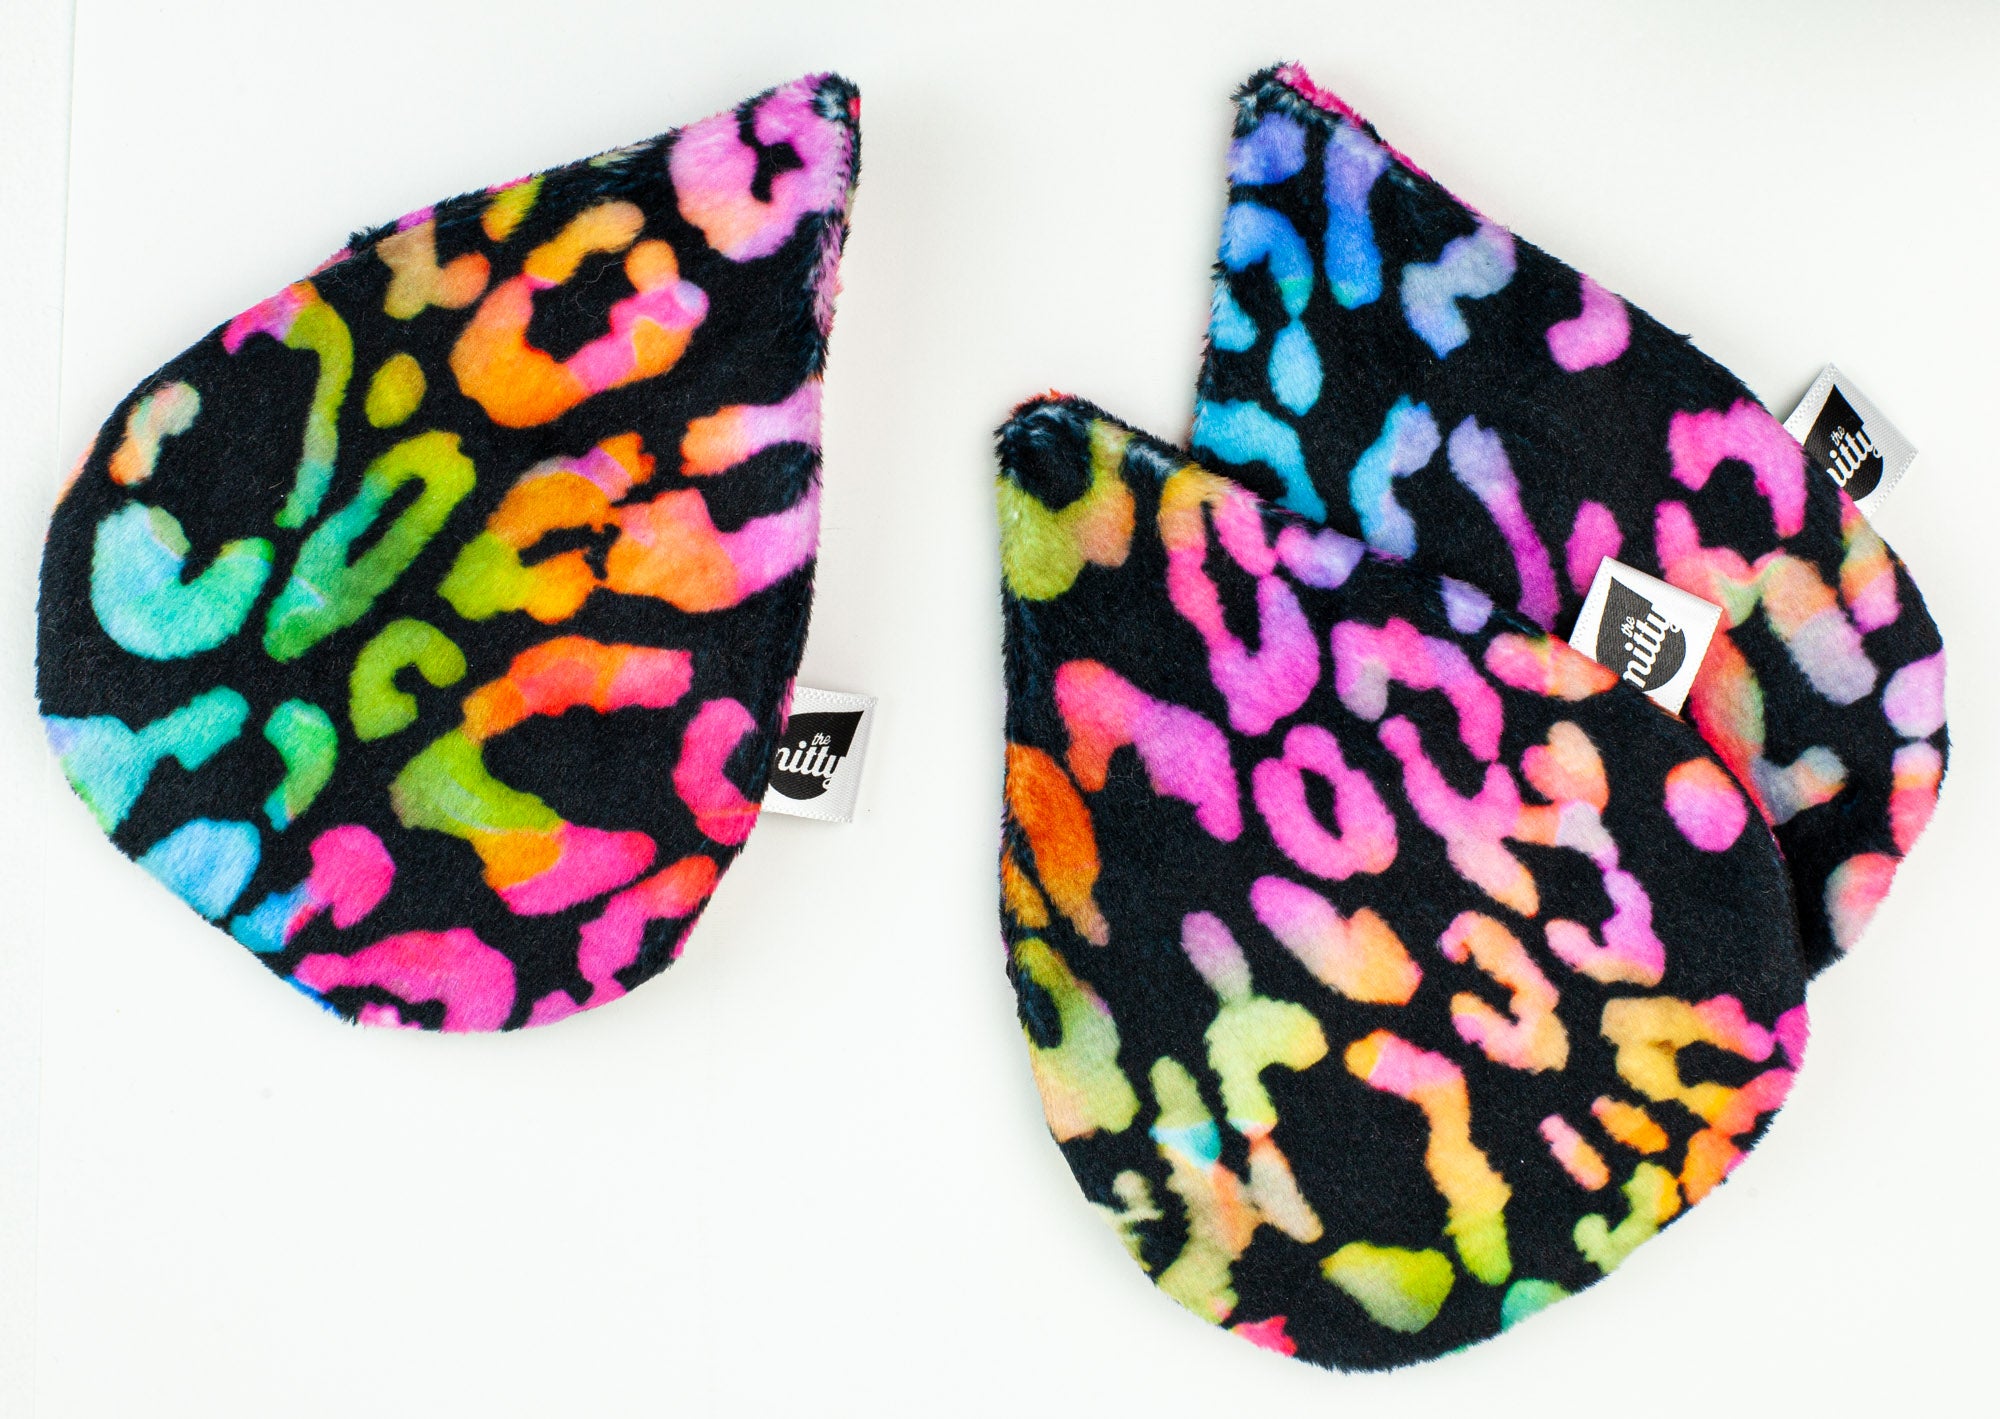 The 90s Mitty--a Makeup Mitty 3-Pack in a neon multicolor leopard print, ultra-gentle skin cleansing tool